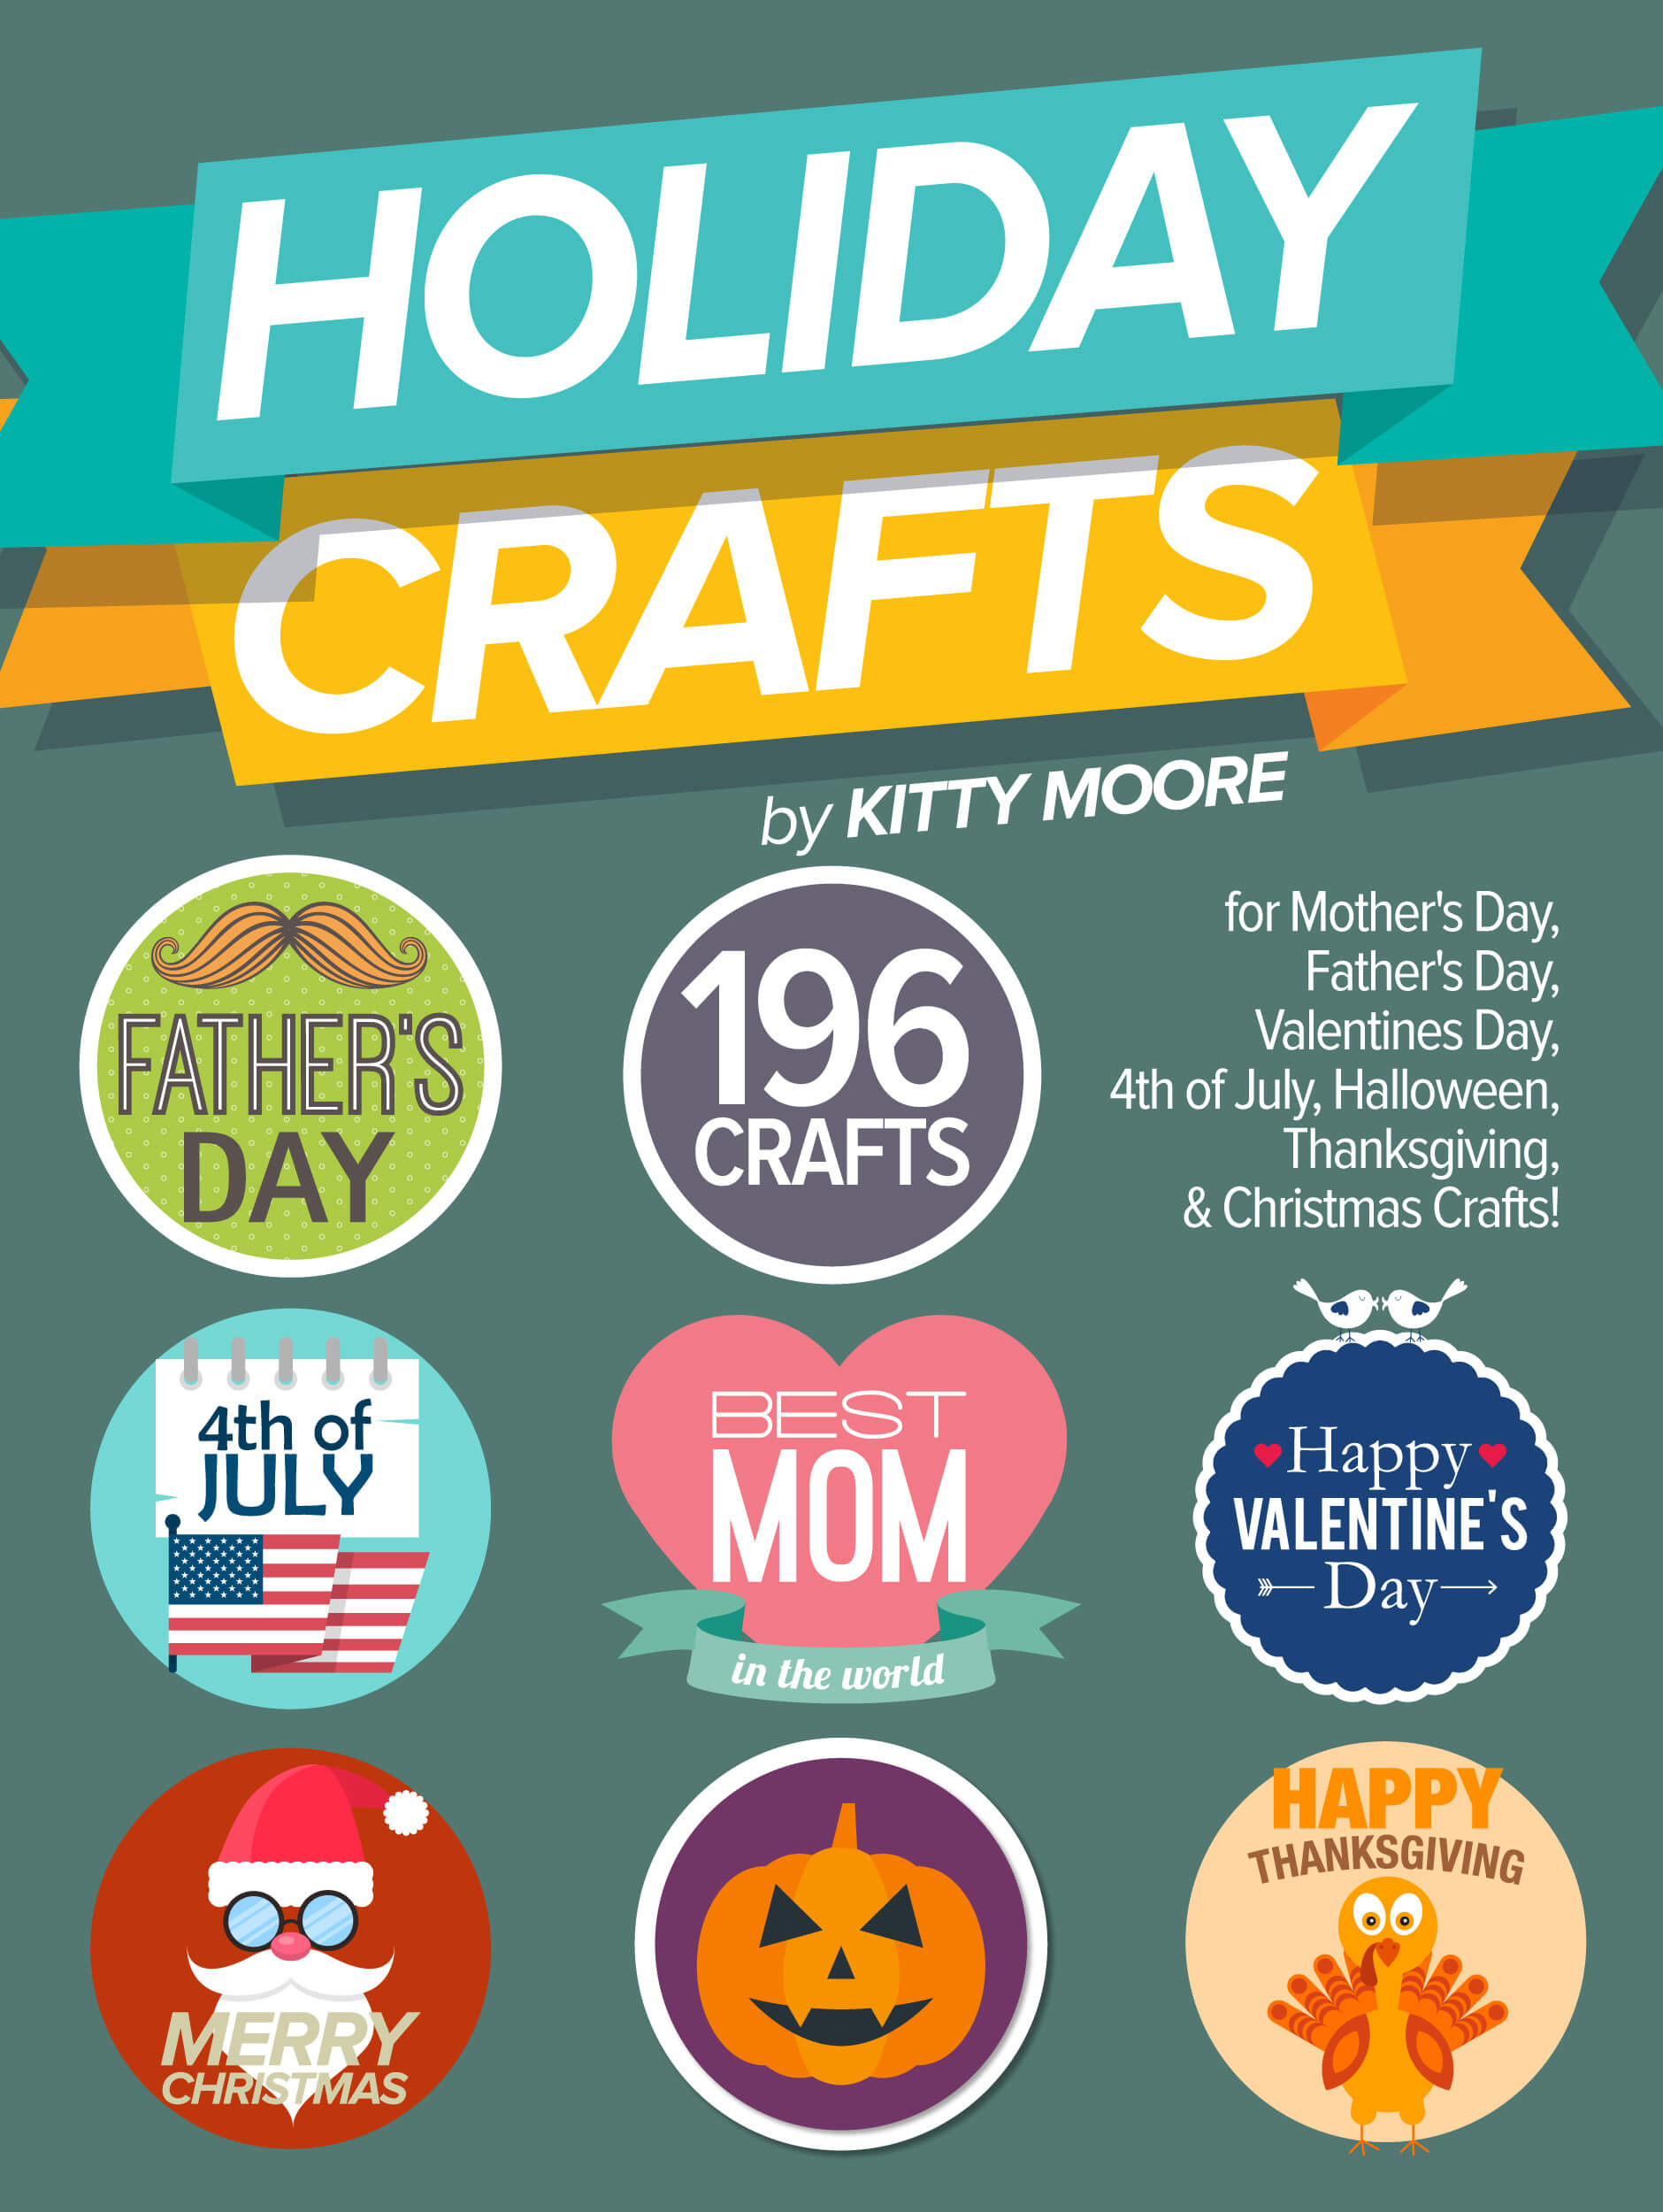 FREE: Holiday Crafts: 196 Crafts for Mother’s Day, Father’s Day, Valentines Day, 4th of July, Halloween Crafts, Thanksgiving Crafts, & Christmas Crafts! by Kitty Moore